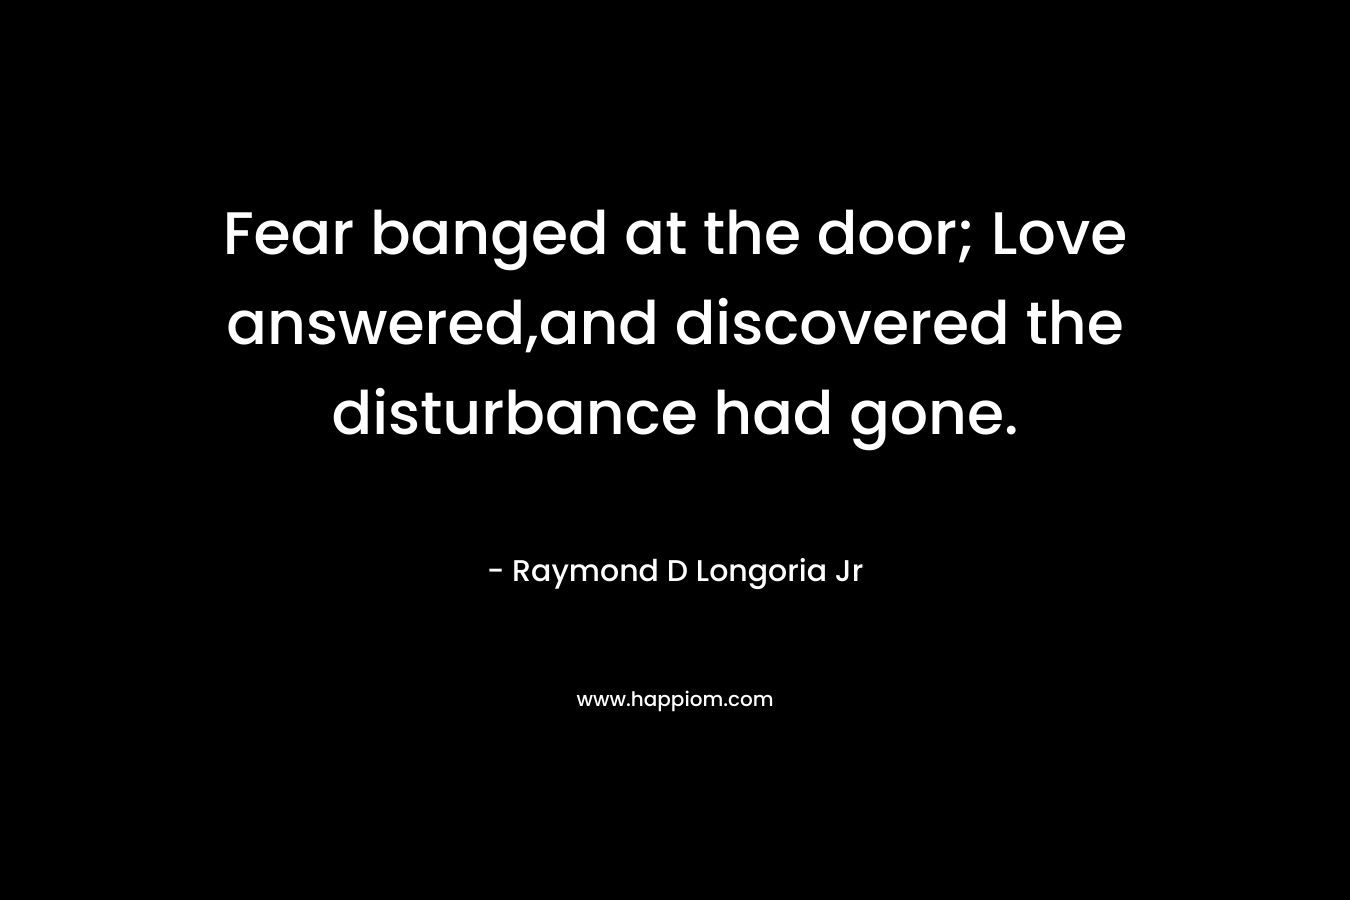 Fear banged at the door; Love answered,and discovered the disturbance had gone. – Raymond D Longoria Jr